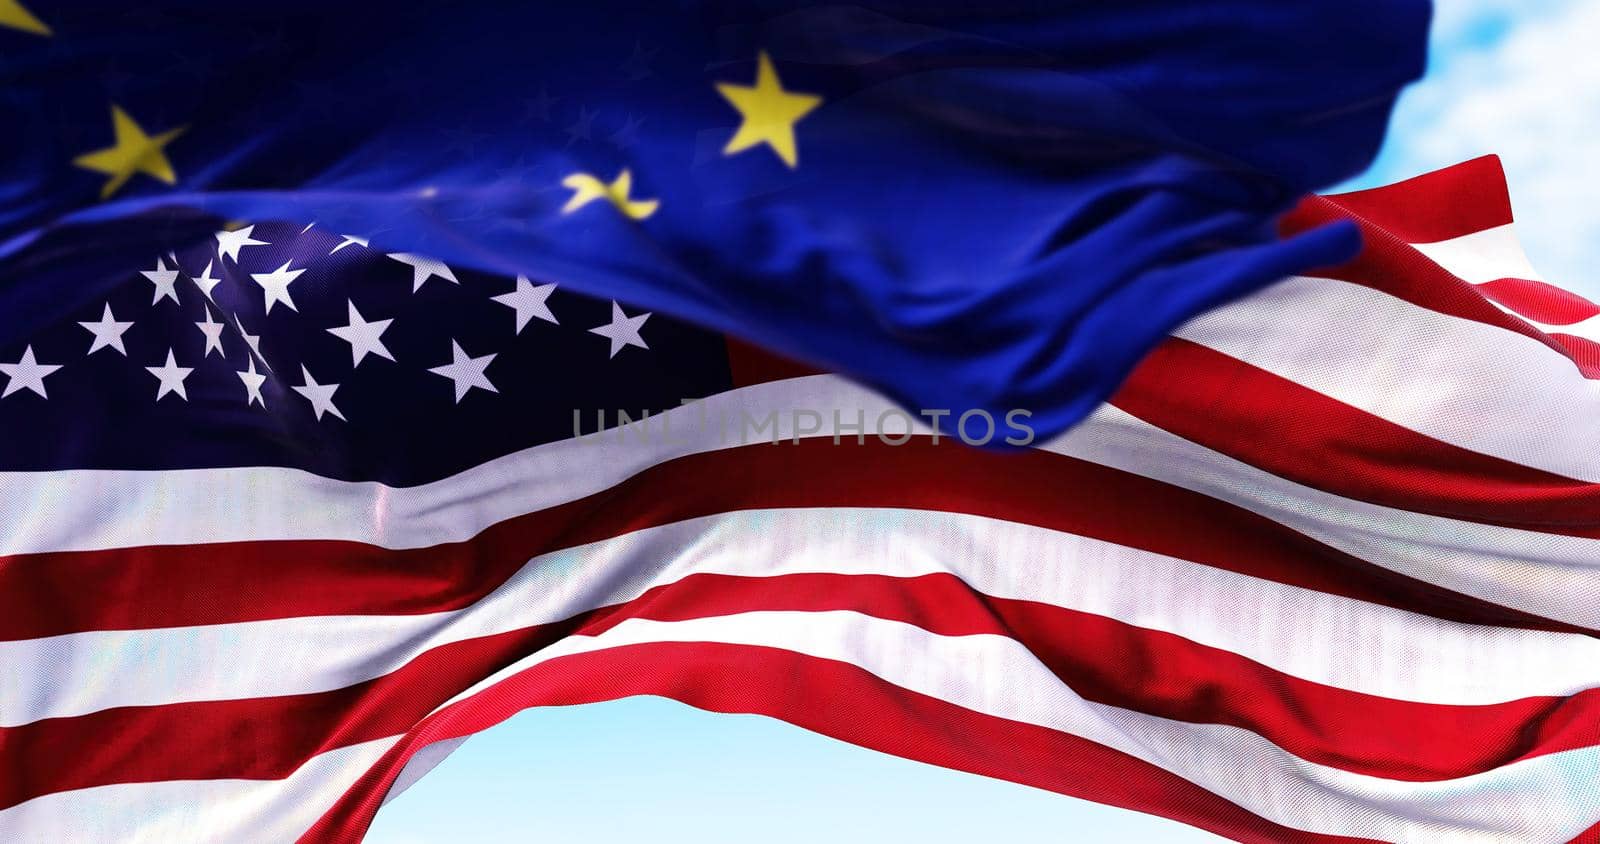 The national flag of the United states of America waving in the wind with the European Union flag by rarrarorro